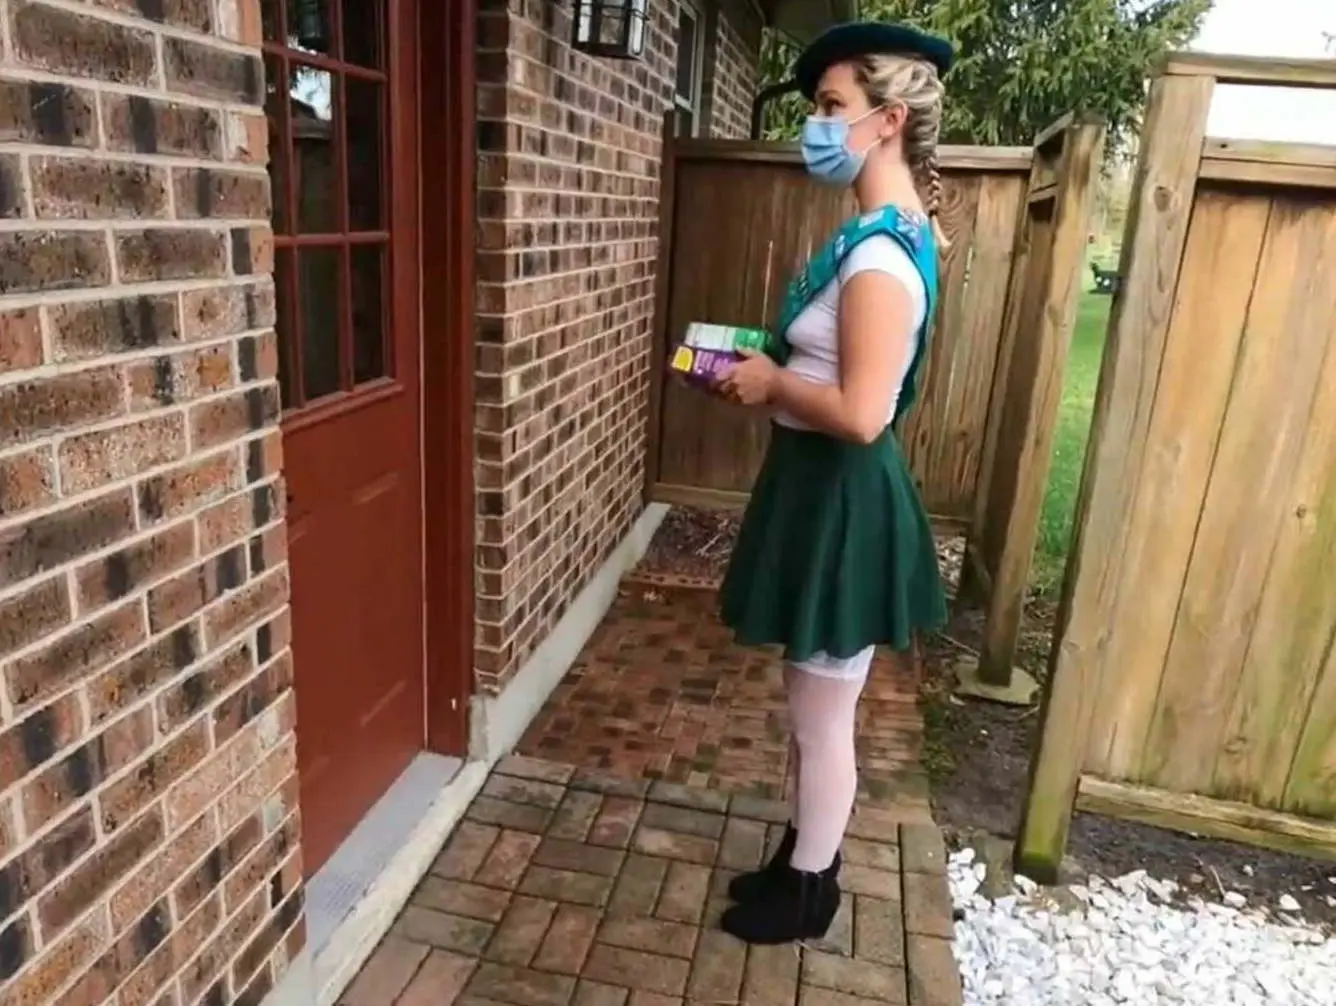 Girl Scouts Selling Cookies Porn - Girl scout selling cookies gets fucked by older man - Sunporno